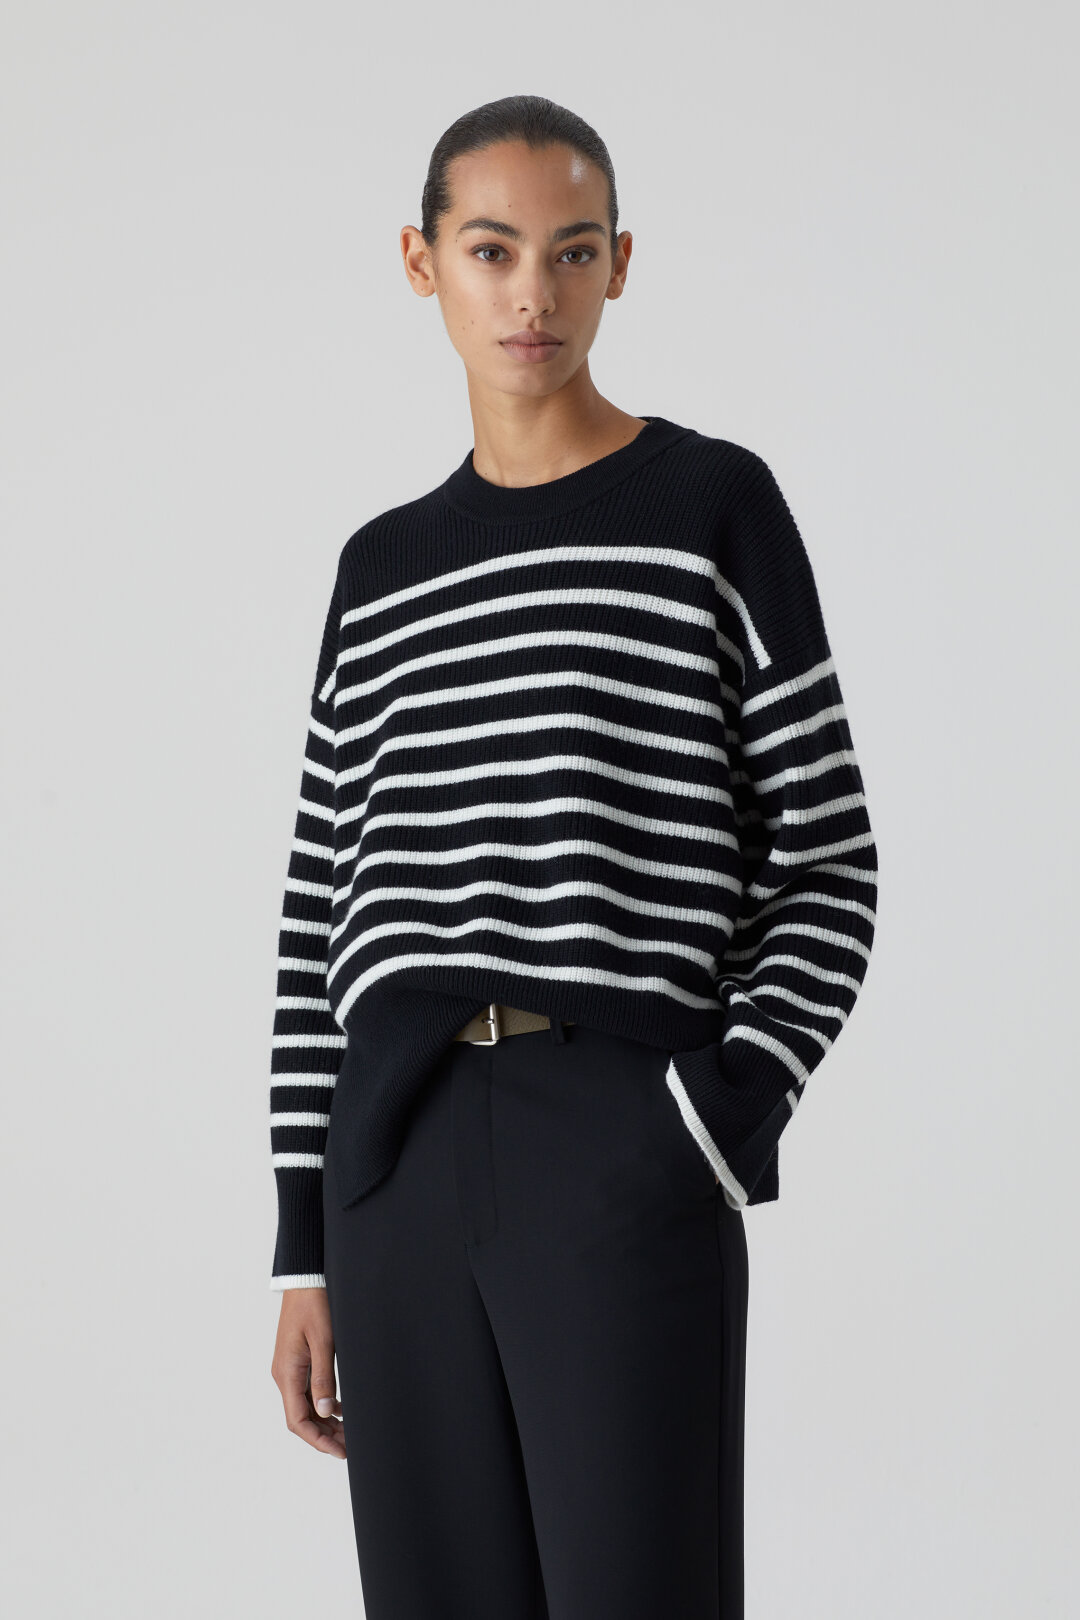 Closed Knit Pullover in Navy Stripe